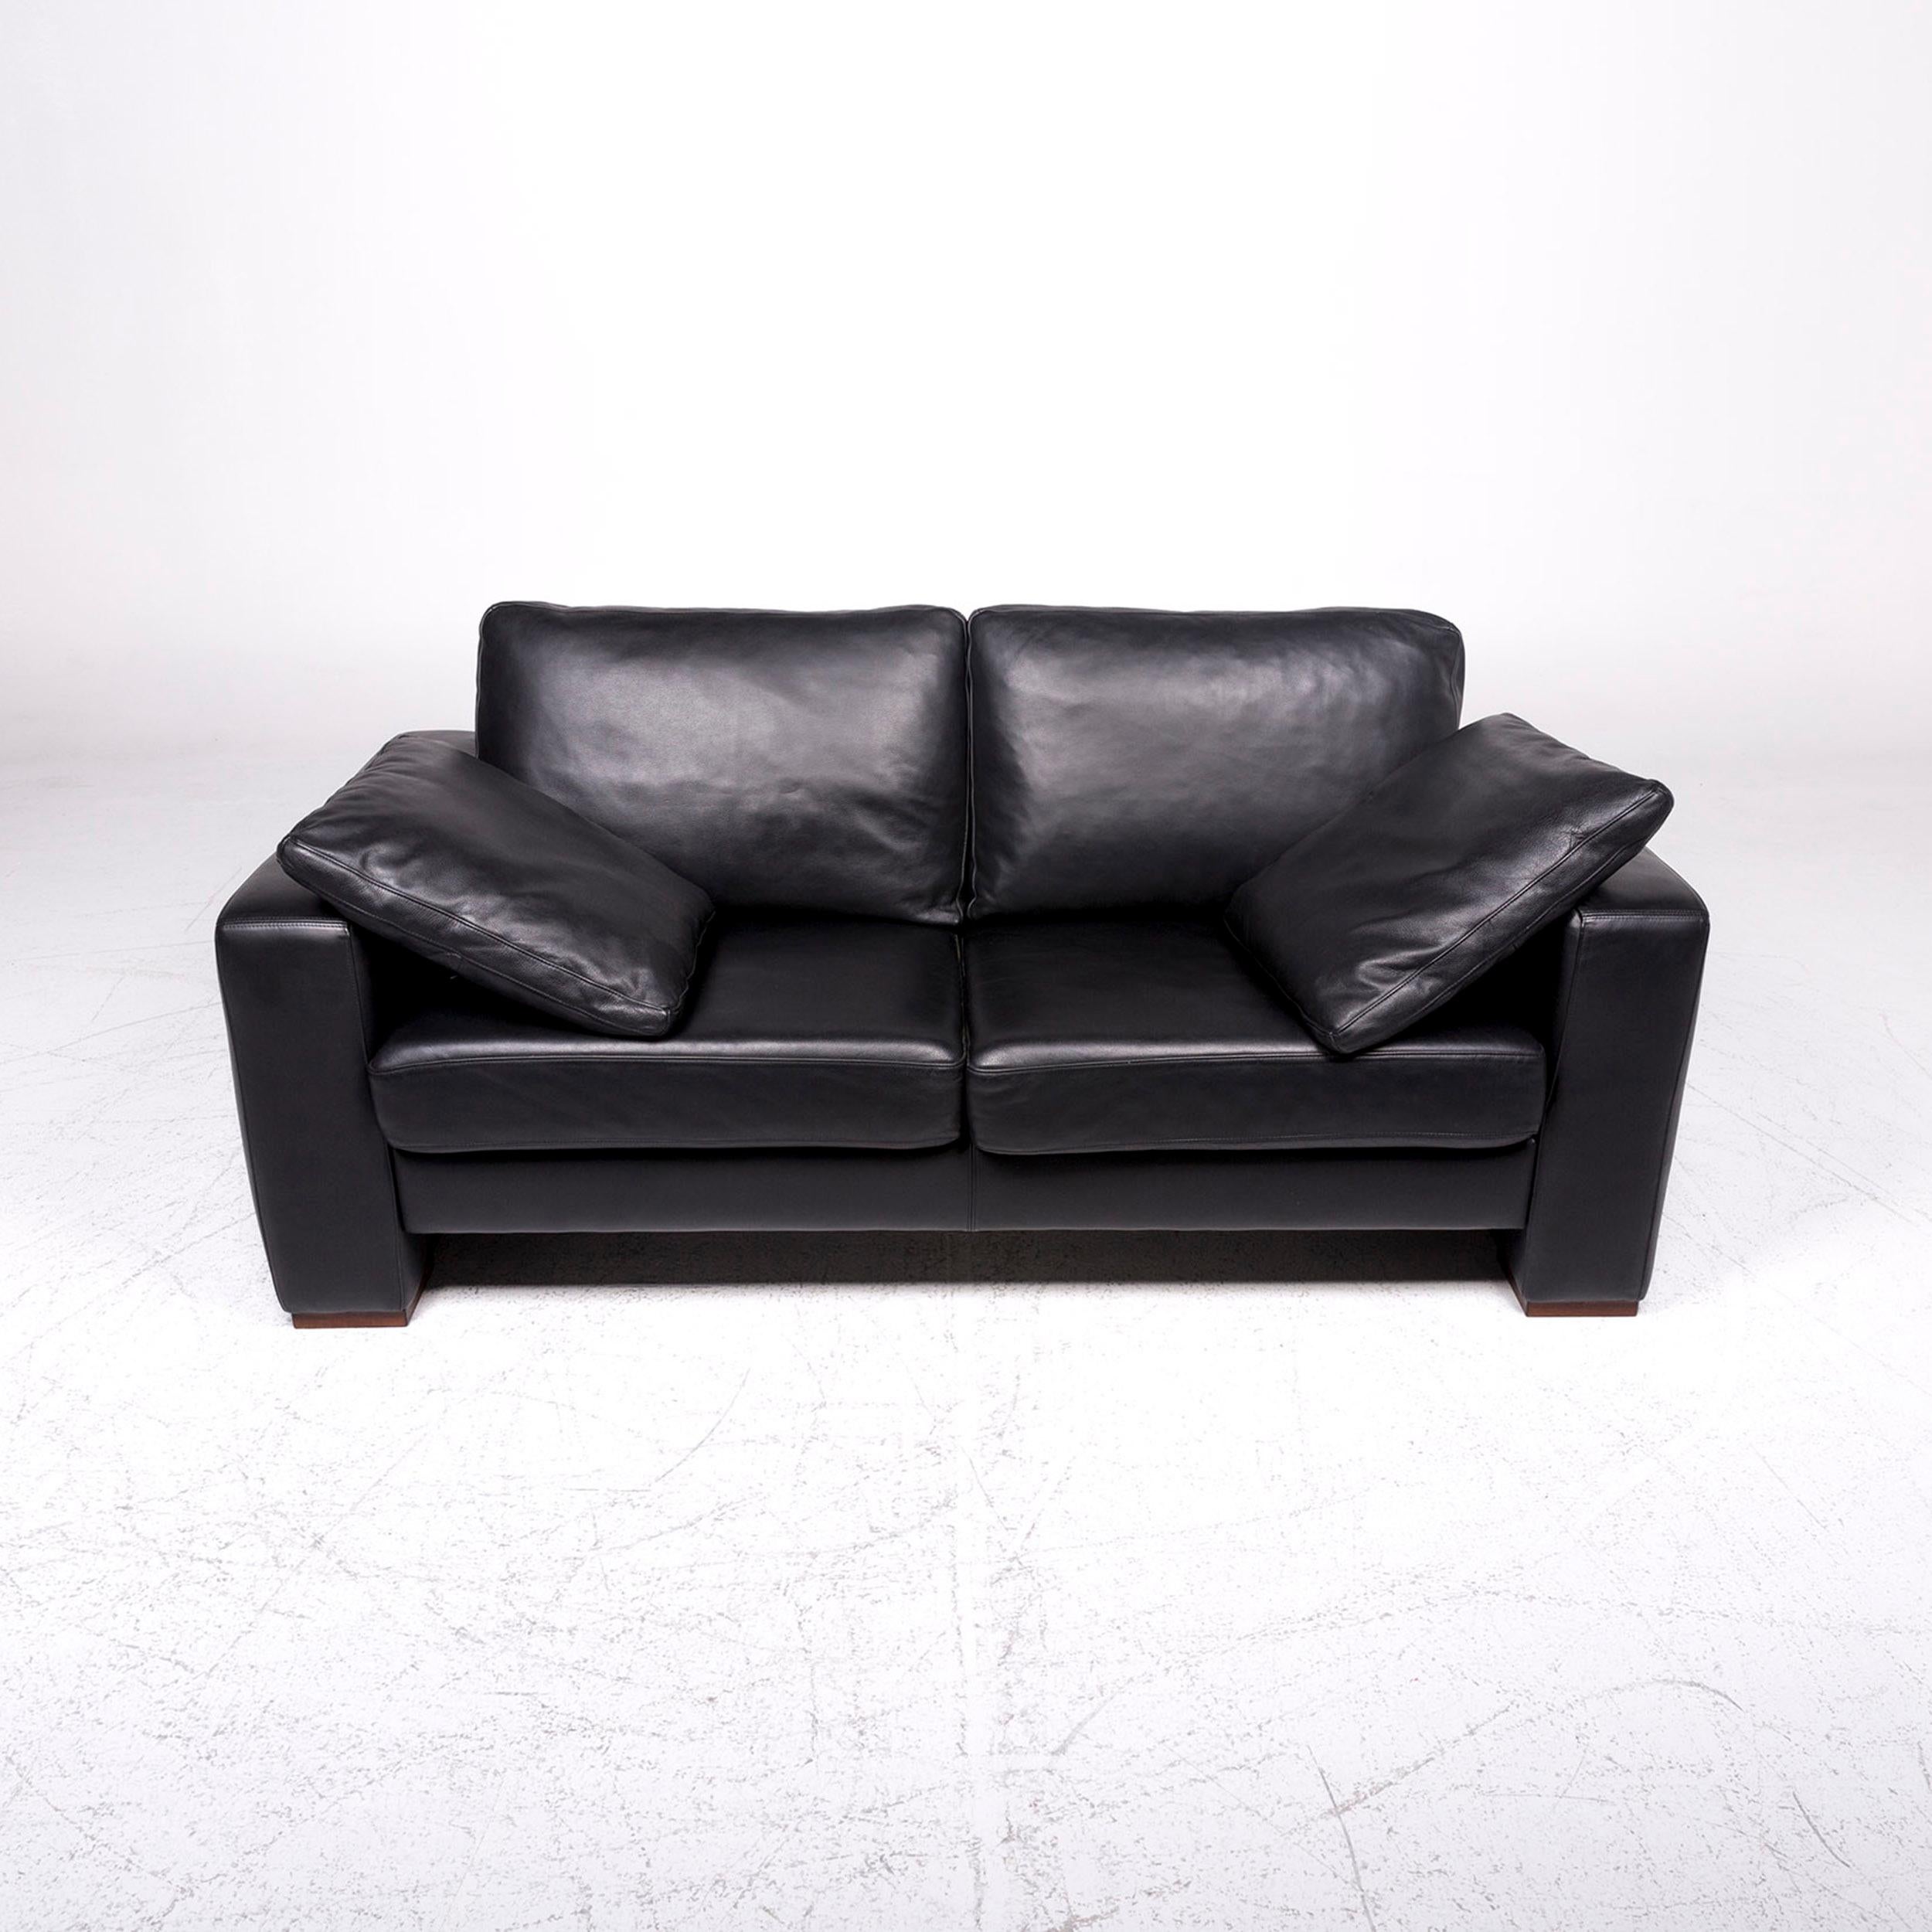 Contemporary Machalke Designer Leather Sofa Black Two-Seat Couch For Sale